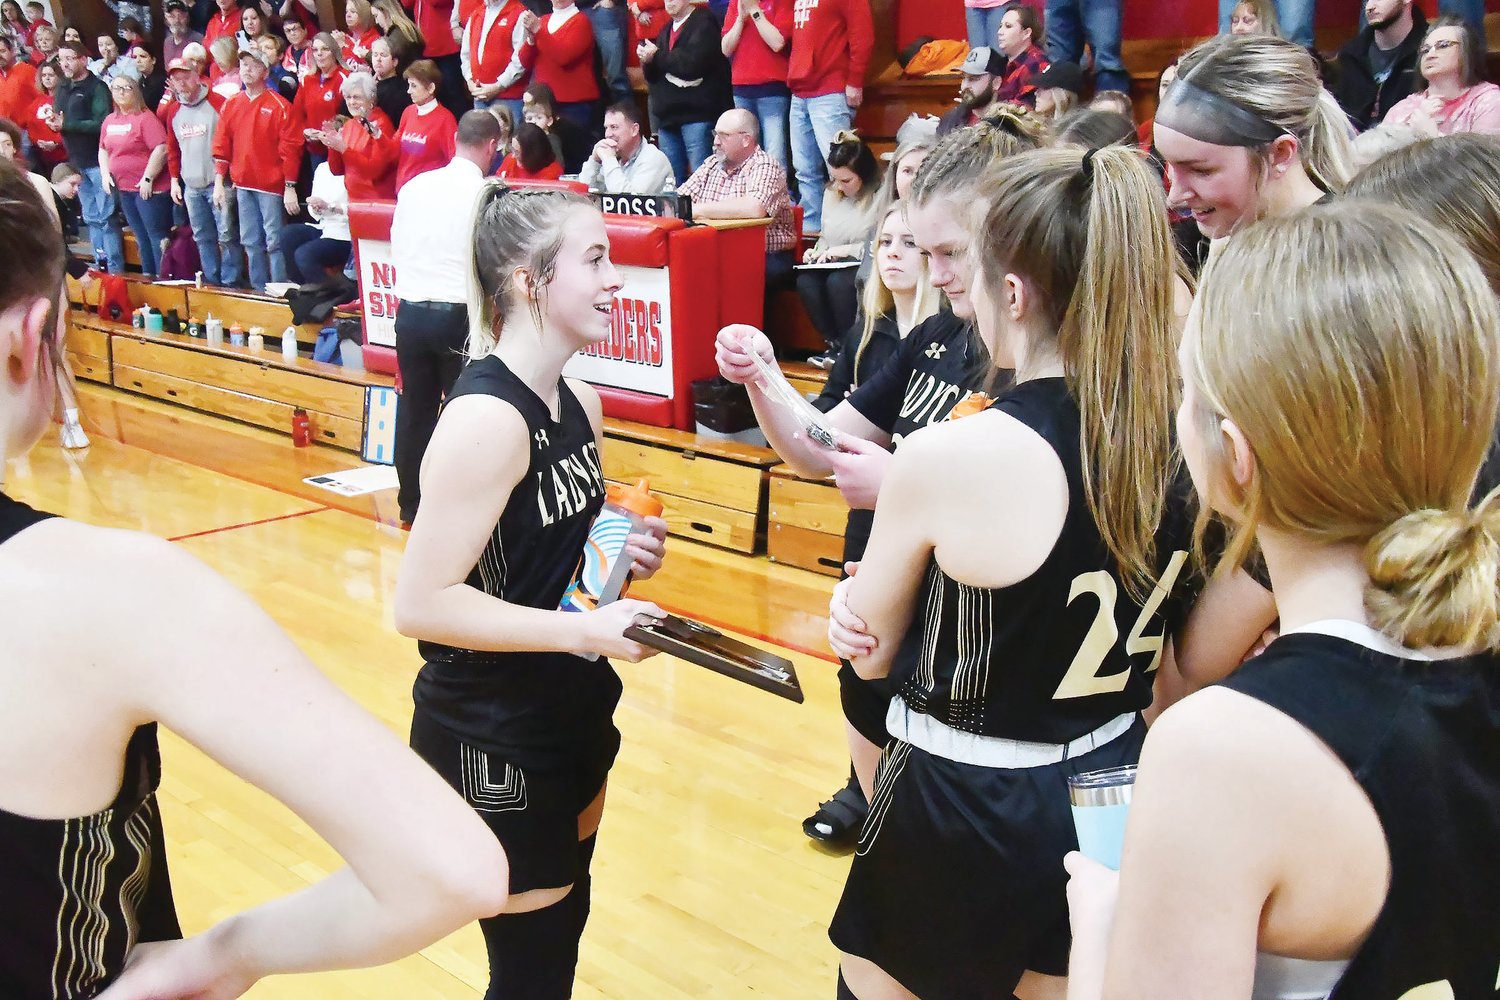 Gracie Brumley takes the second-place plaque to her team after Saturday's girls championship game at the North Shelby Tournament in Shelbyville.